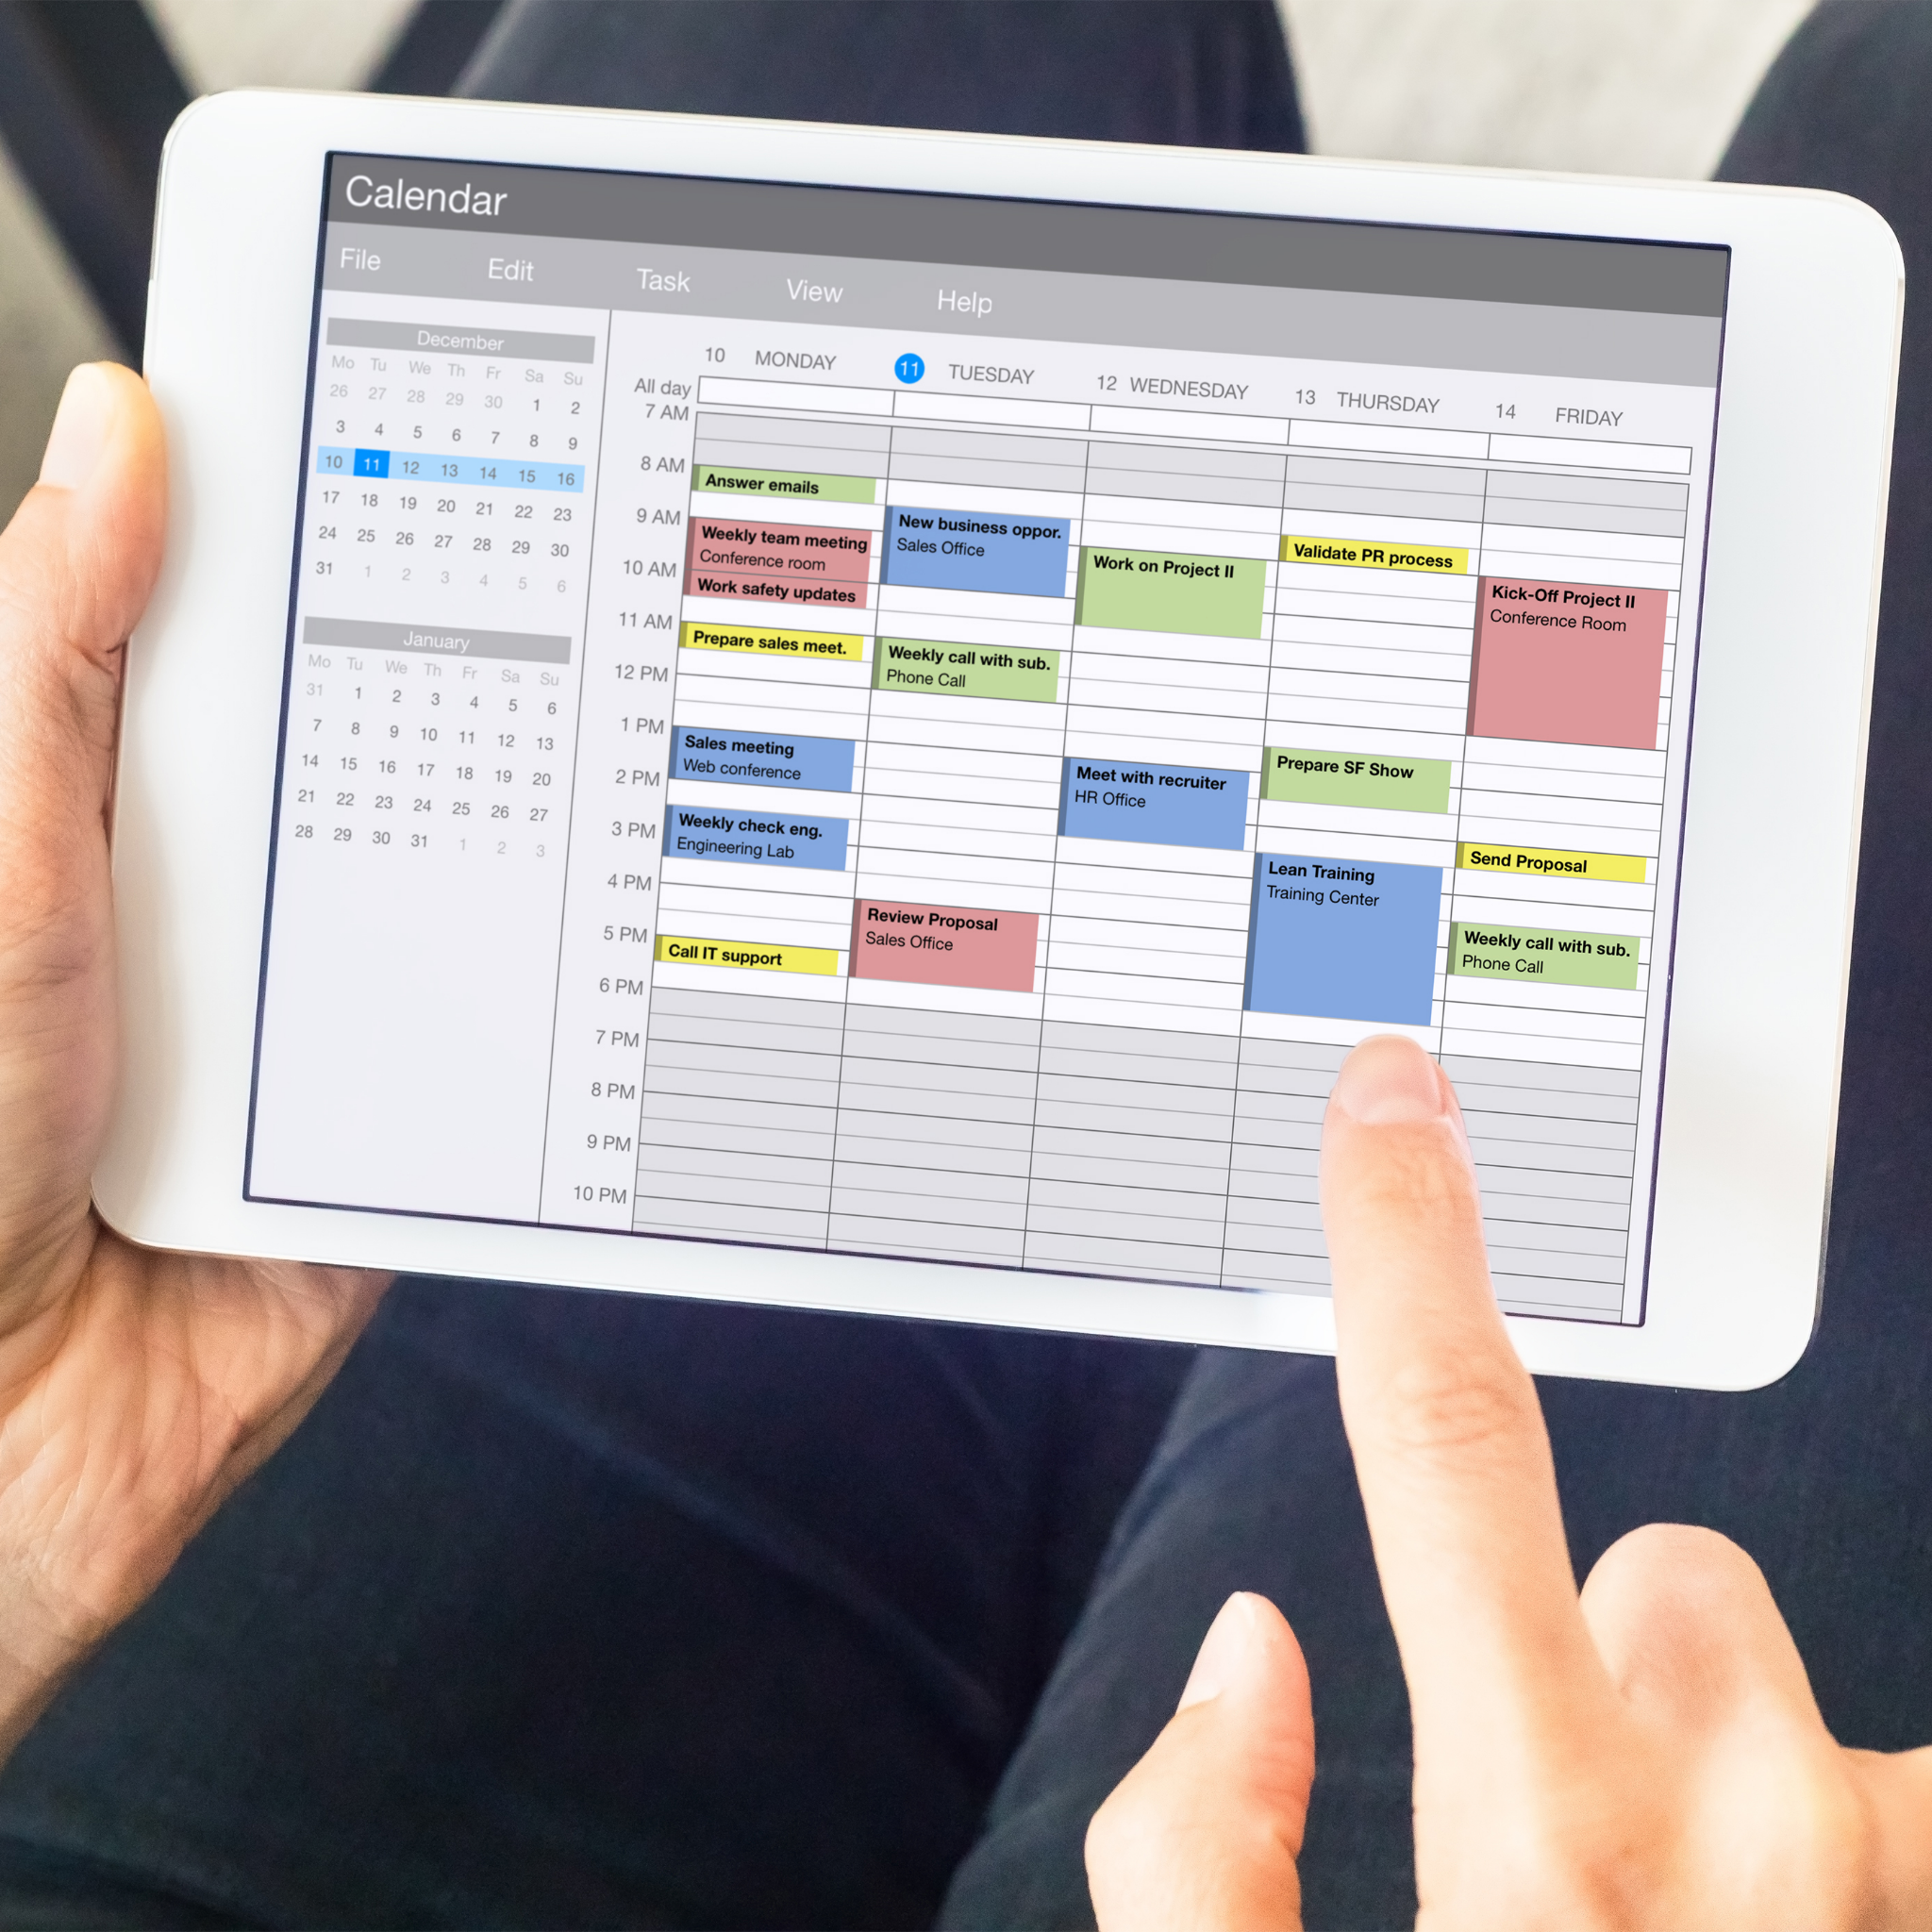 Schedule Planning & Operational Administration